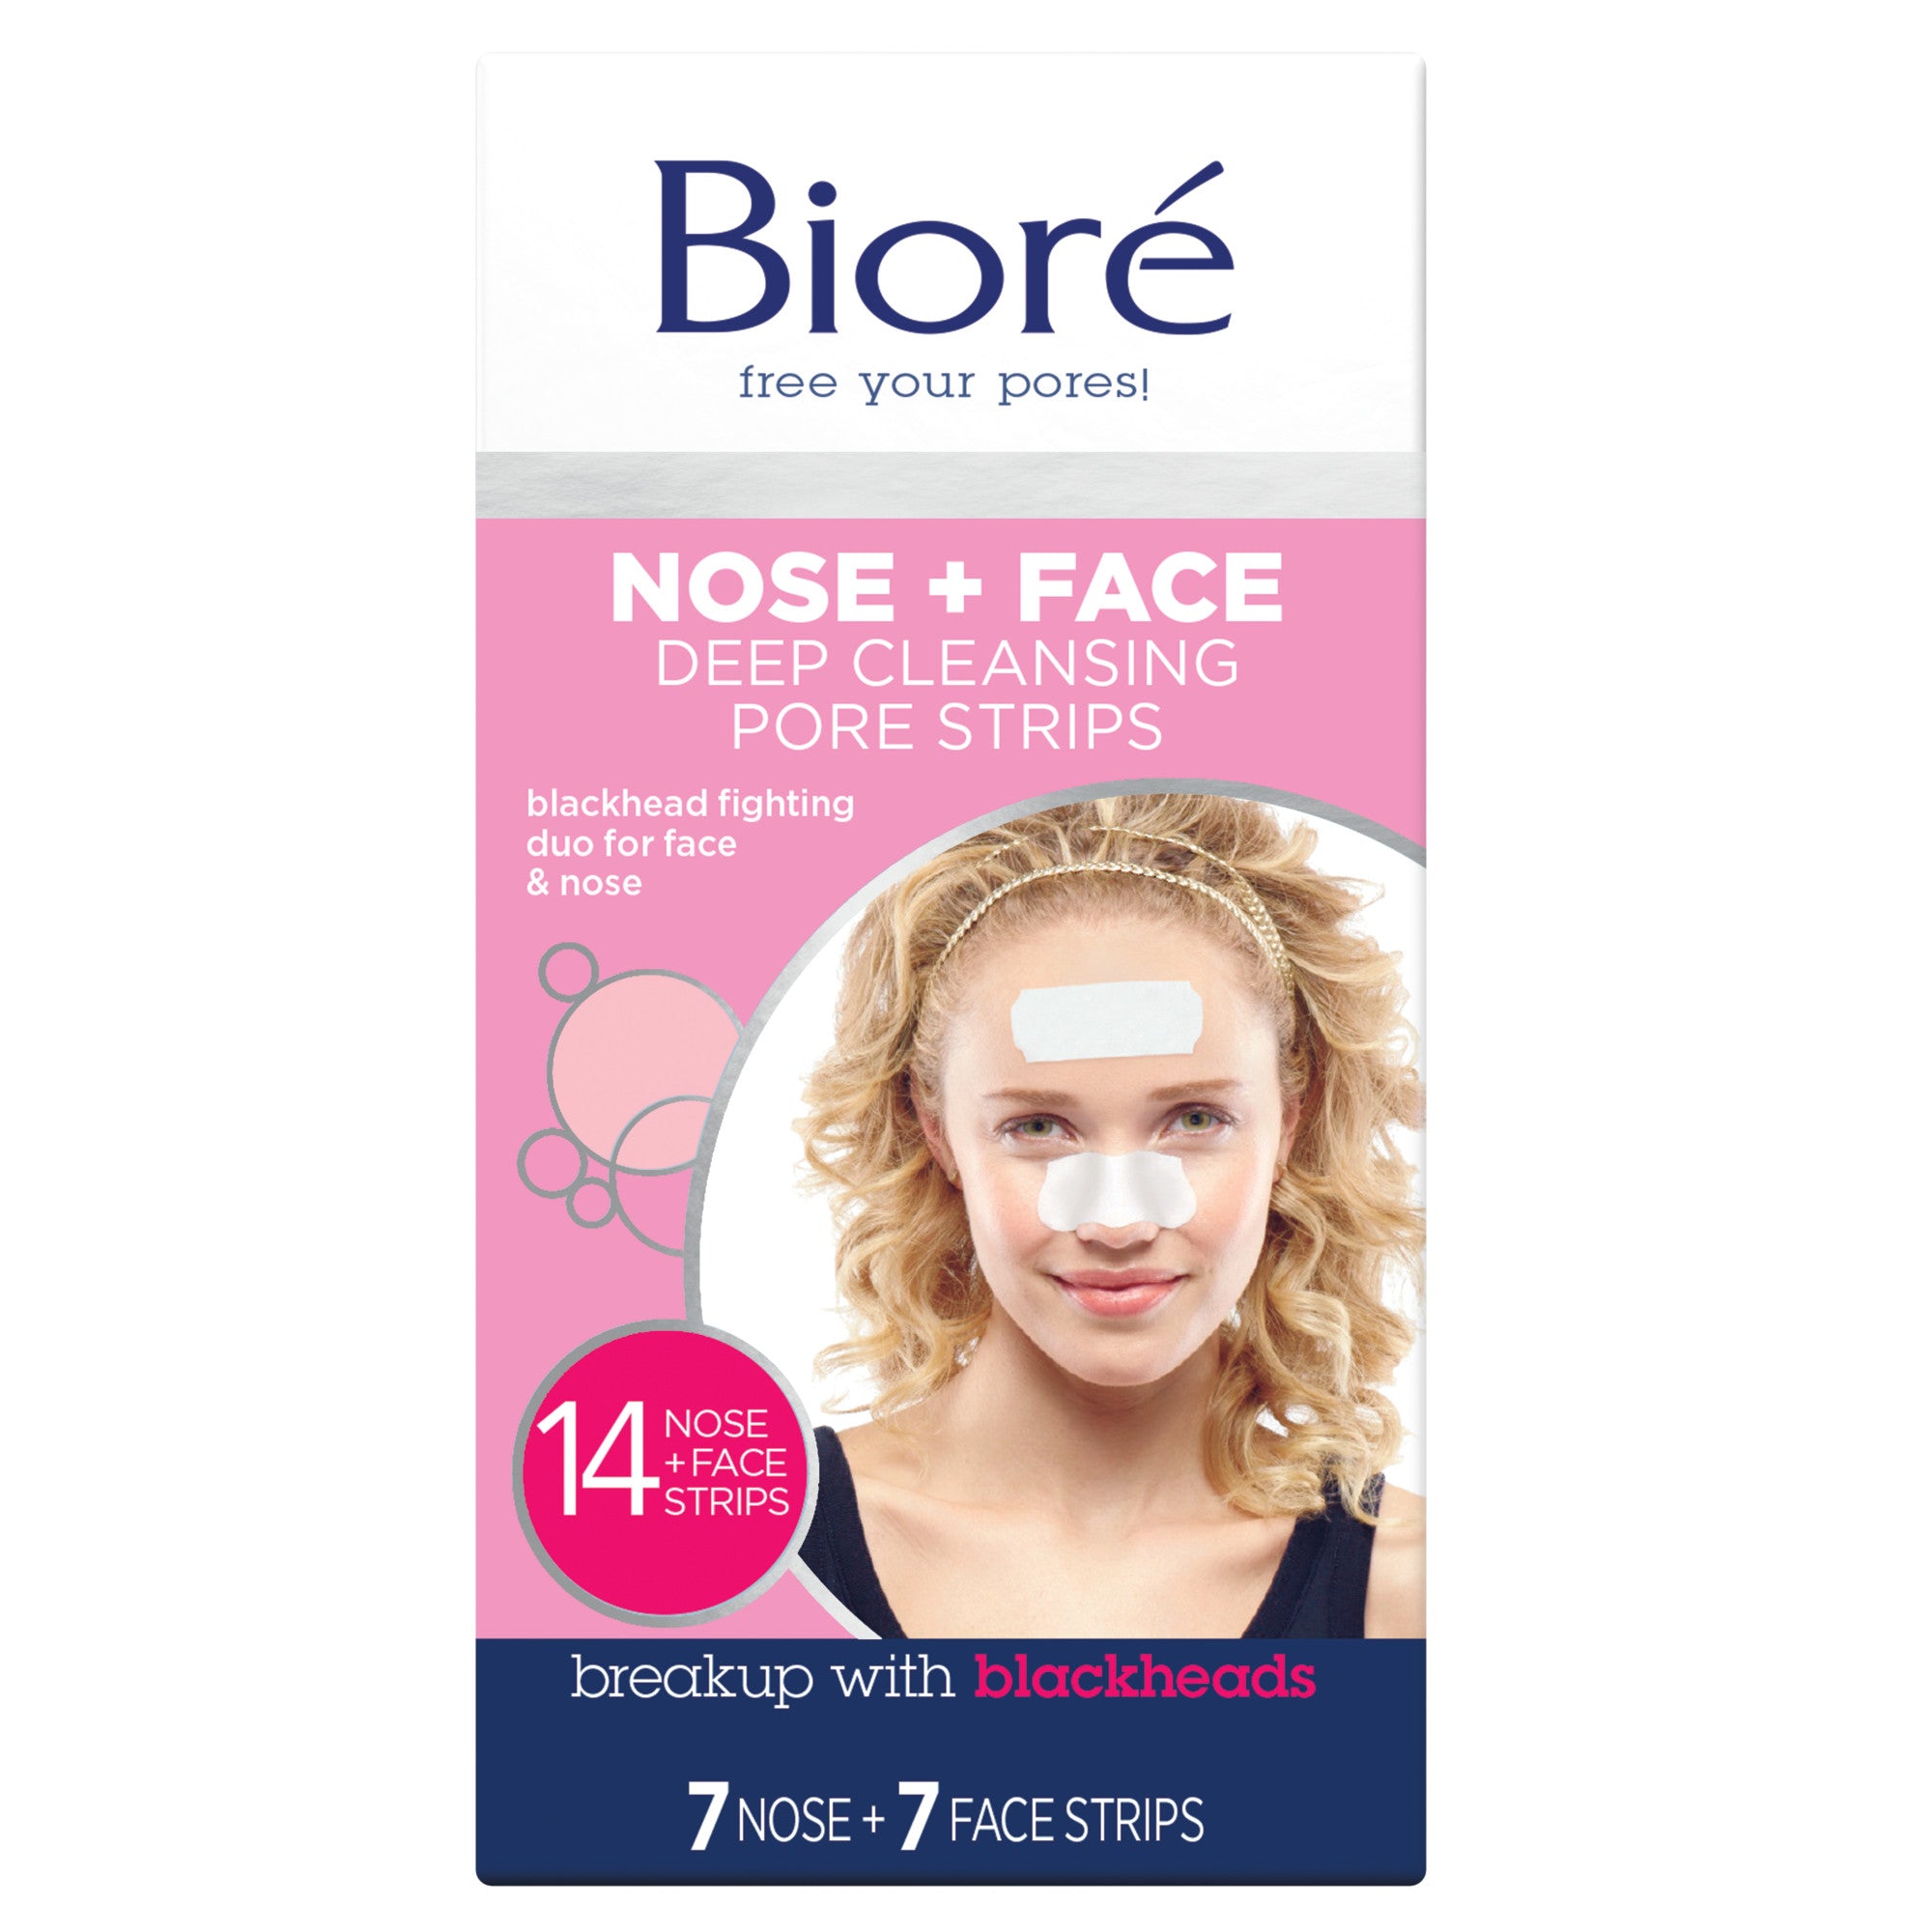 Nose+Face Deep Cleansing Pore Strips